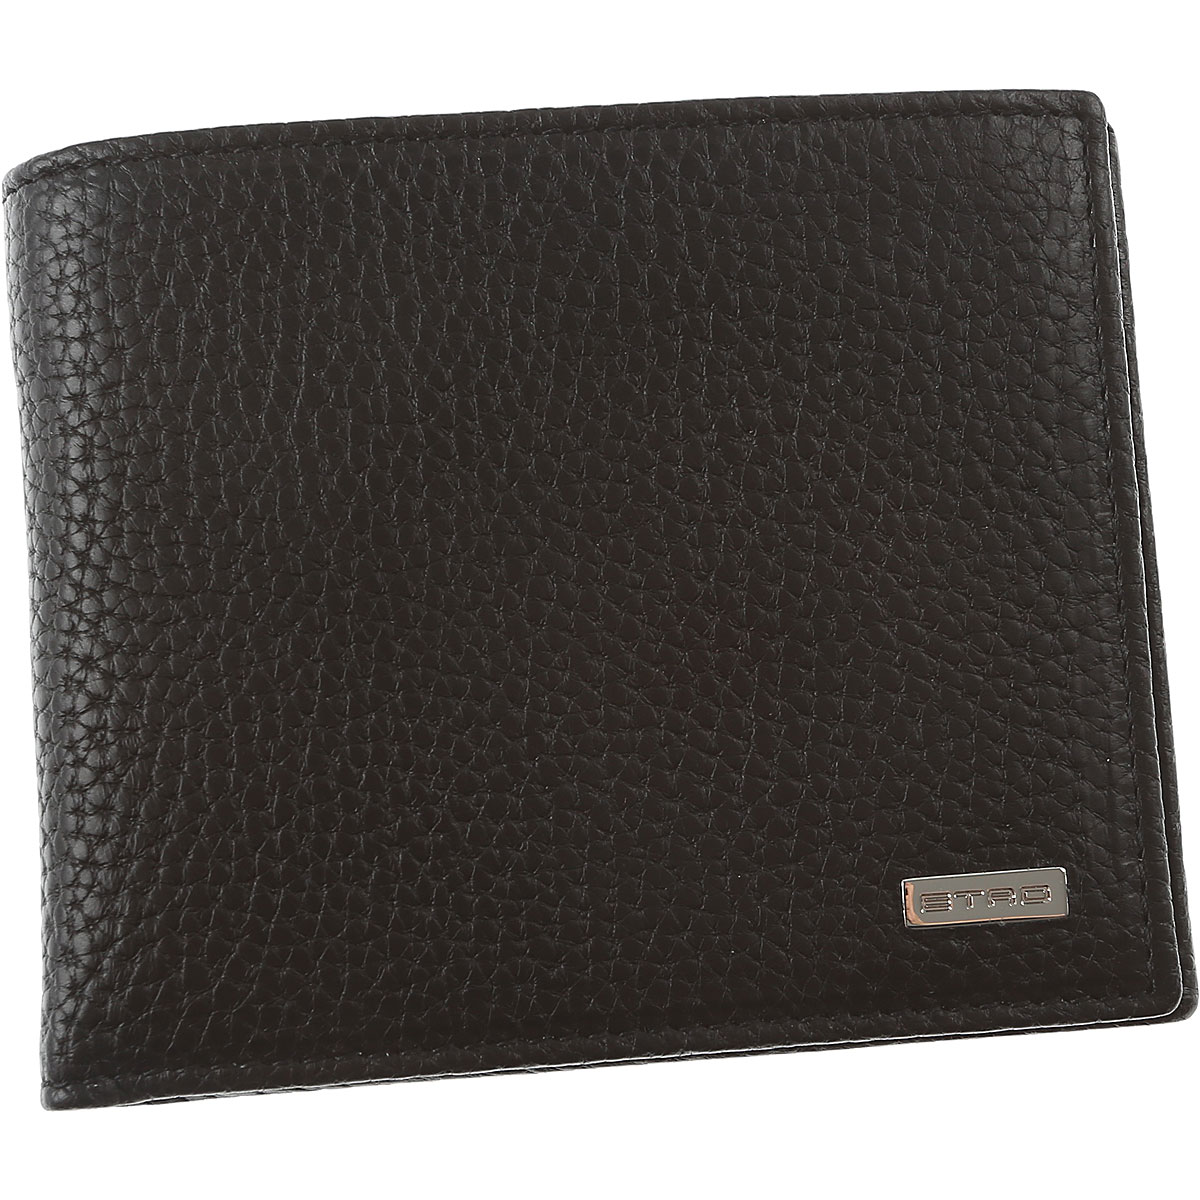 Mens Wallets Etro, Style code: 1f557-2406-1